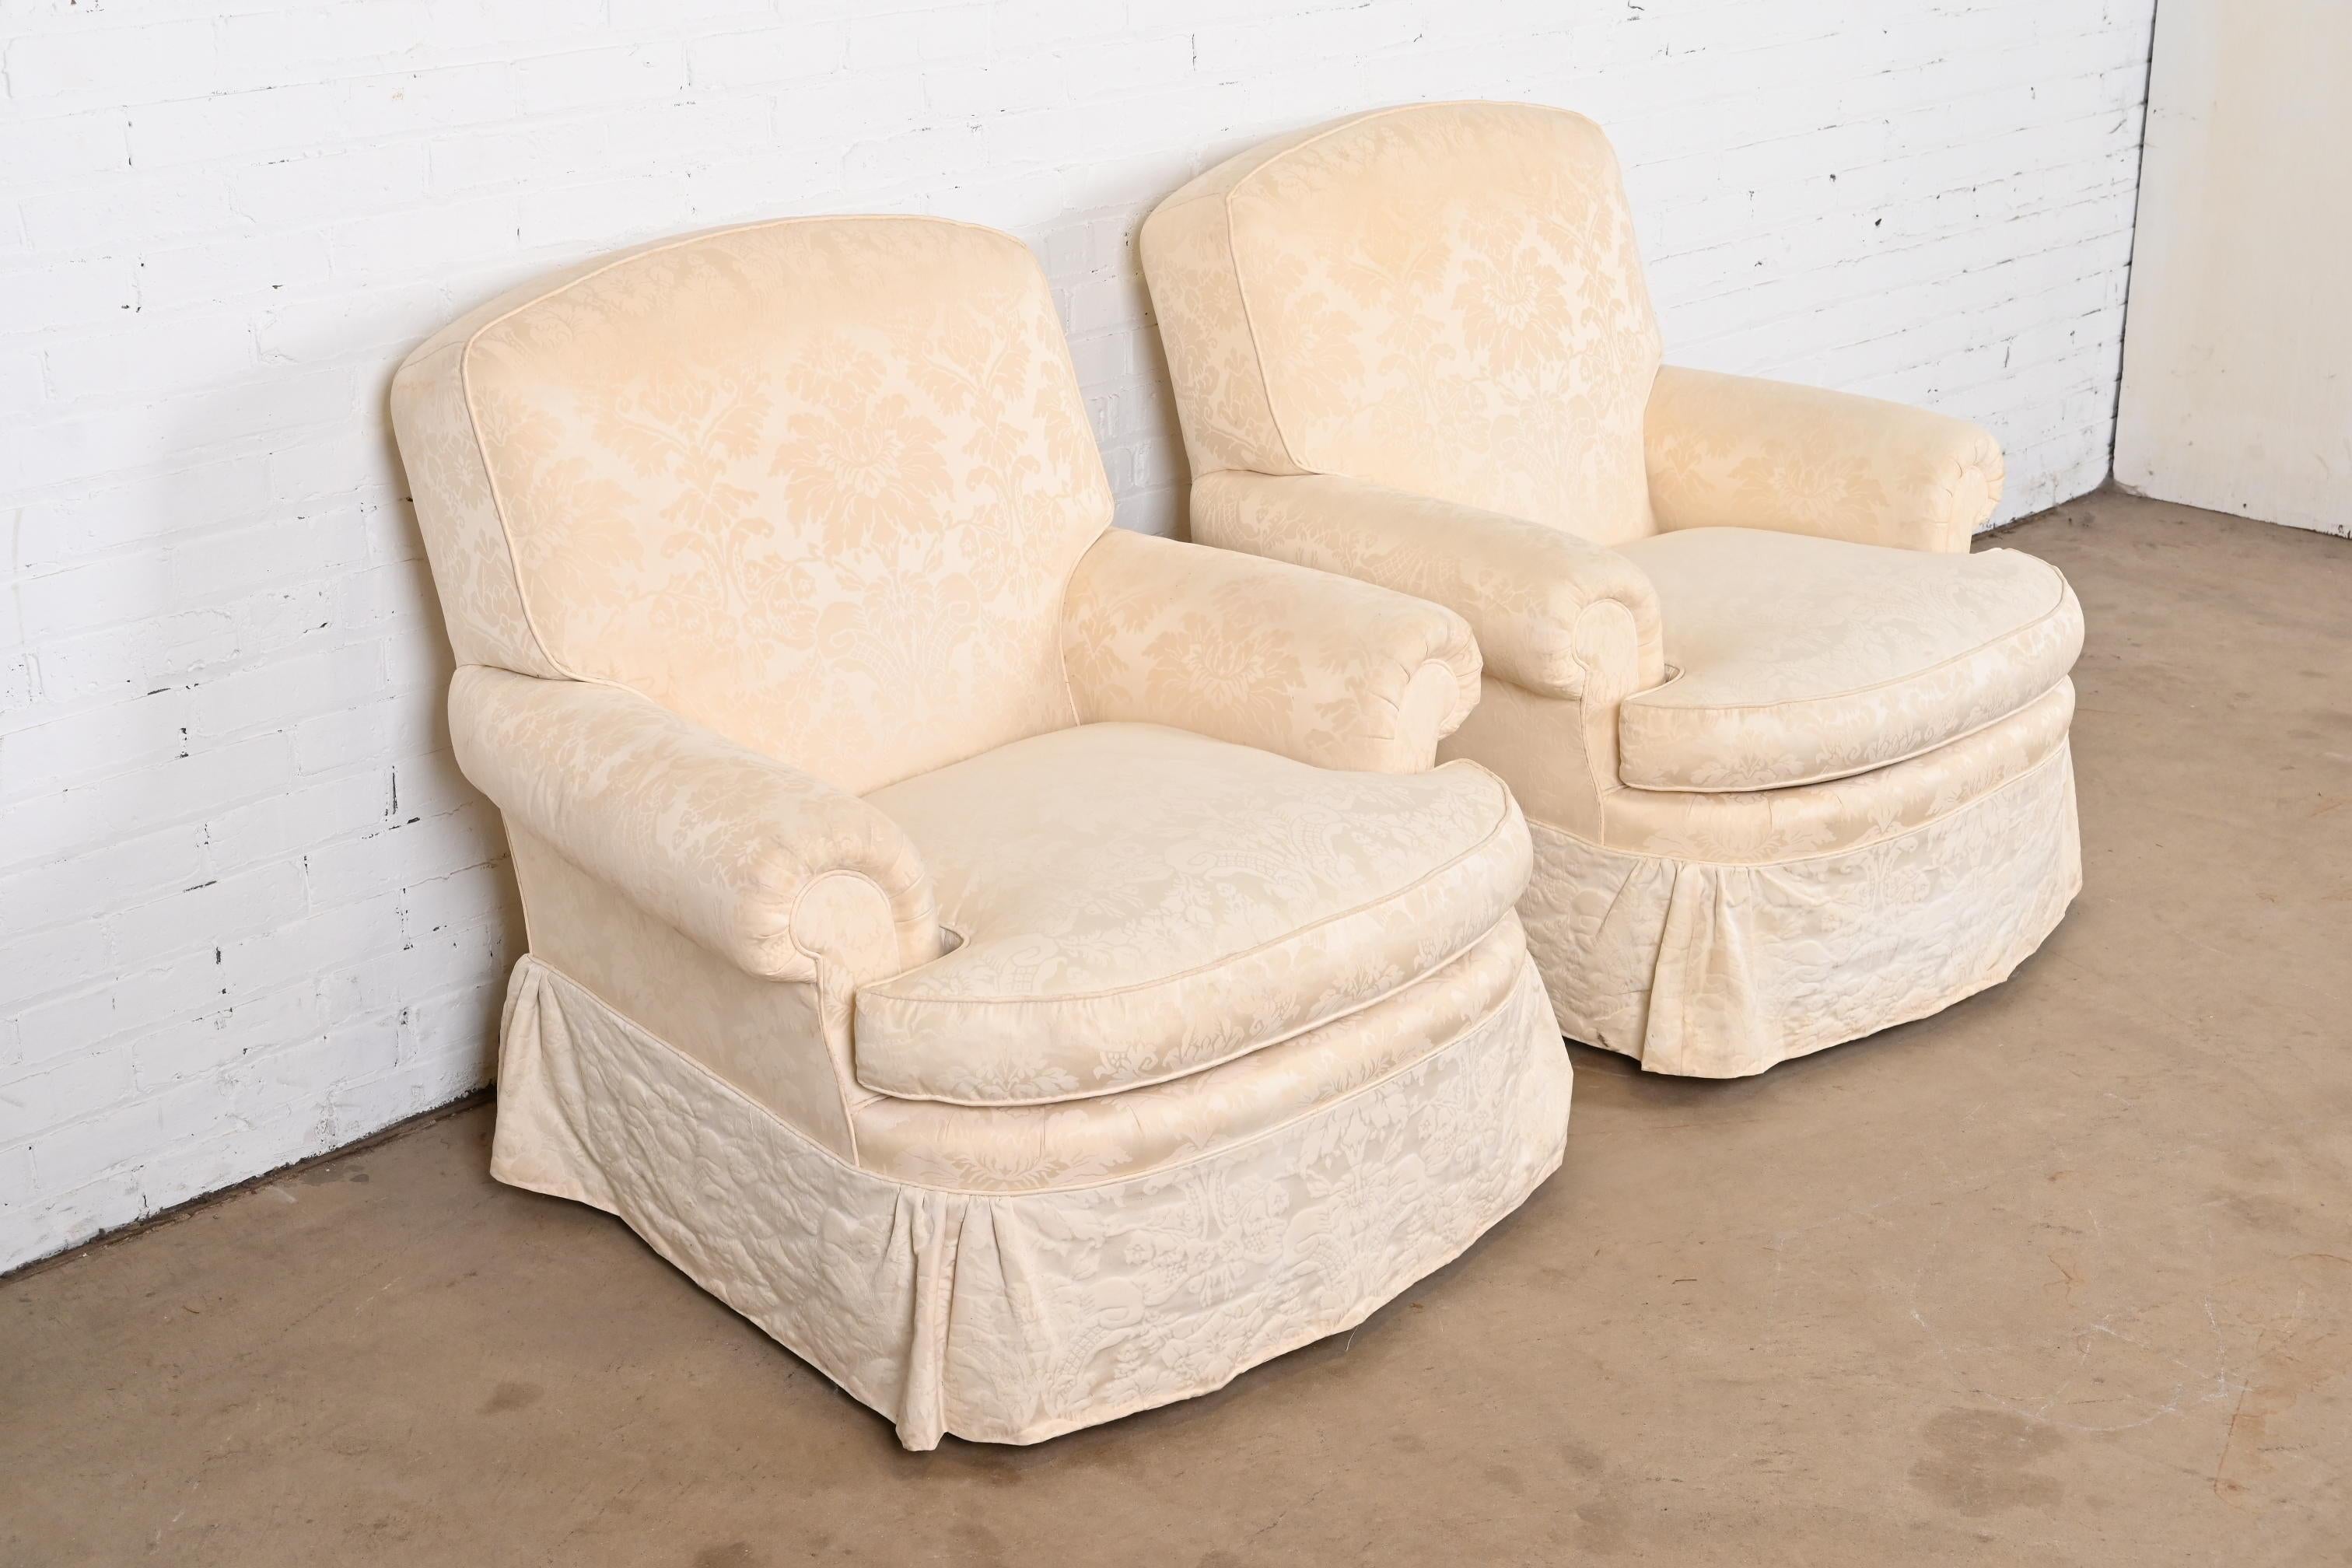 Upholstery Baker Furniture Damask Upholstered Lounge Chairs, One Chair